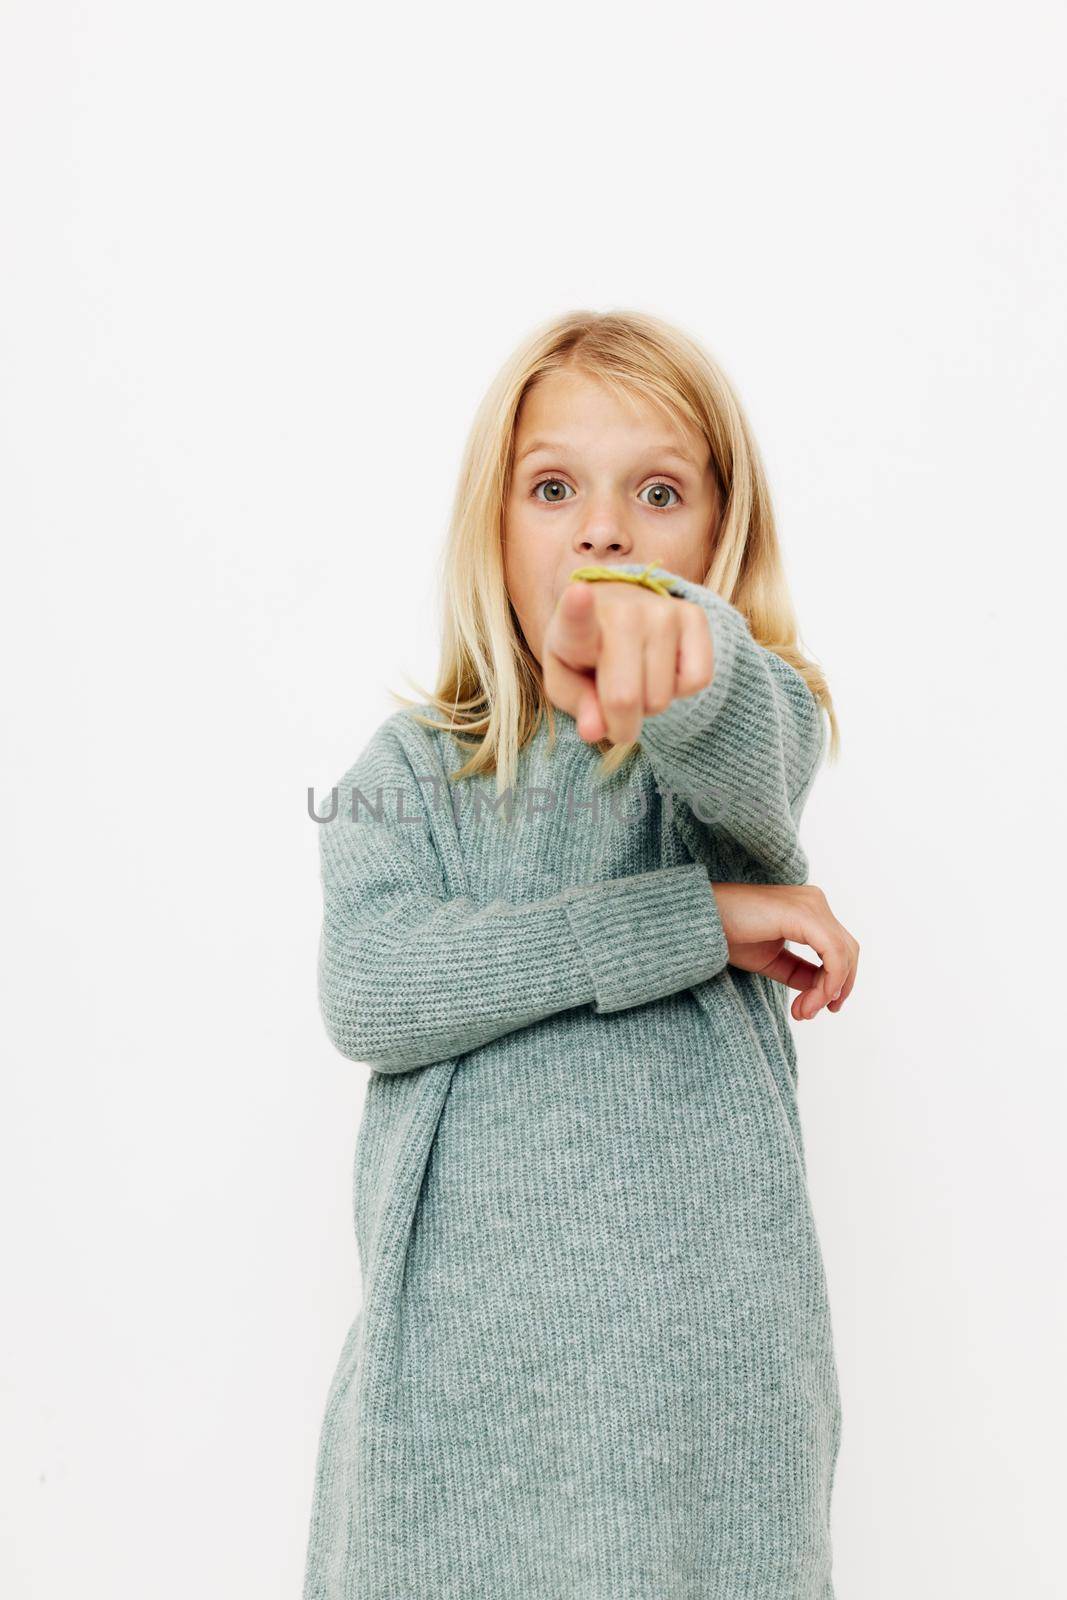 happy cute girl in a sweater, grimaces kids lifestyle concept by SHOTPRIME